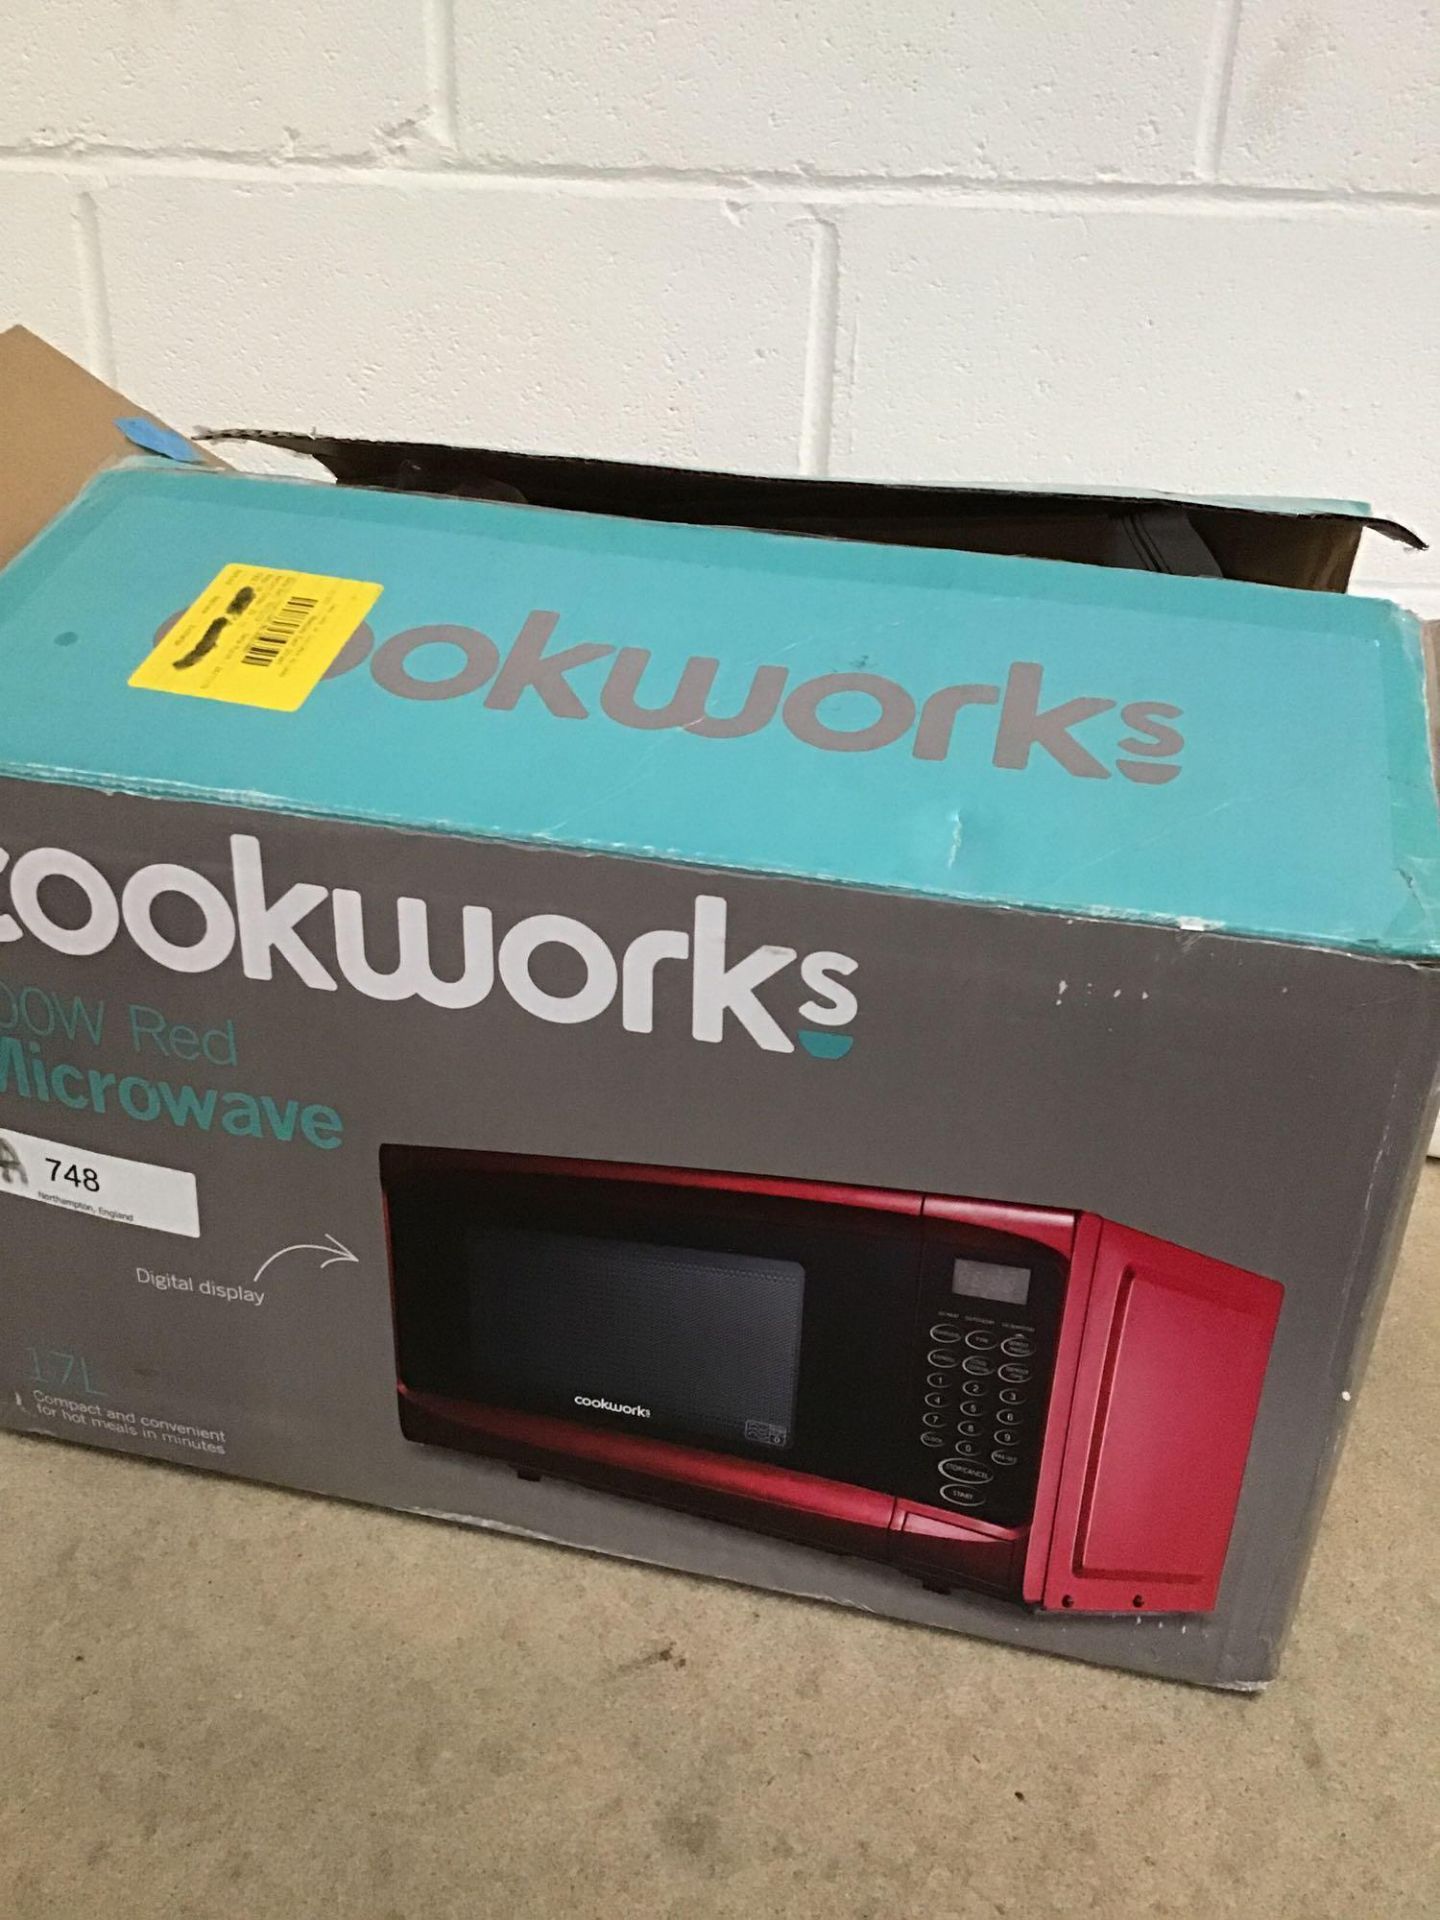 Cookworks 700W Standard Microwave P70B - Red - £54.99 RRP - Image 2 of 5